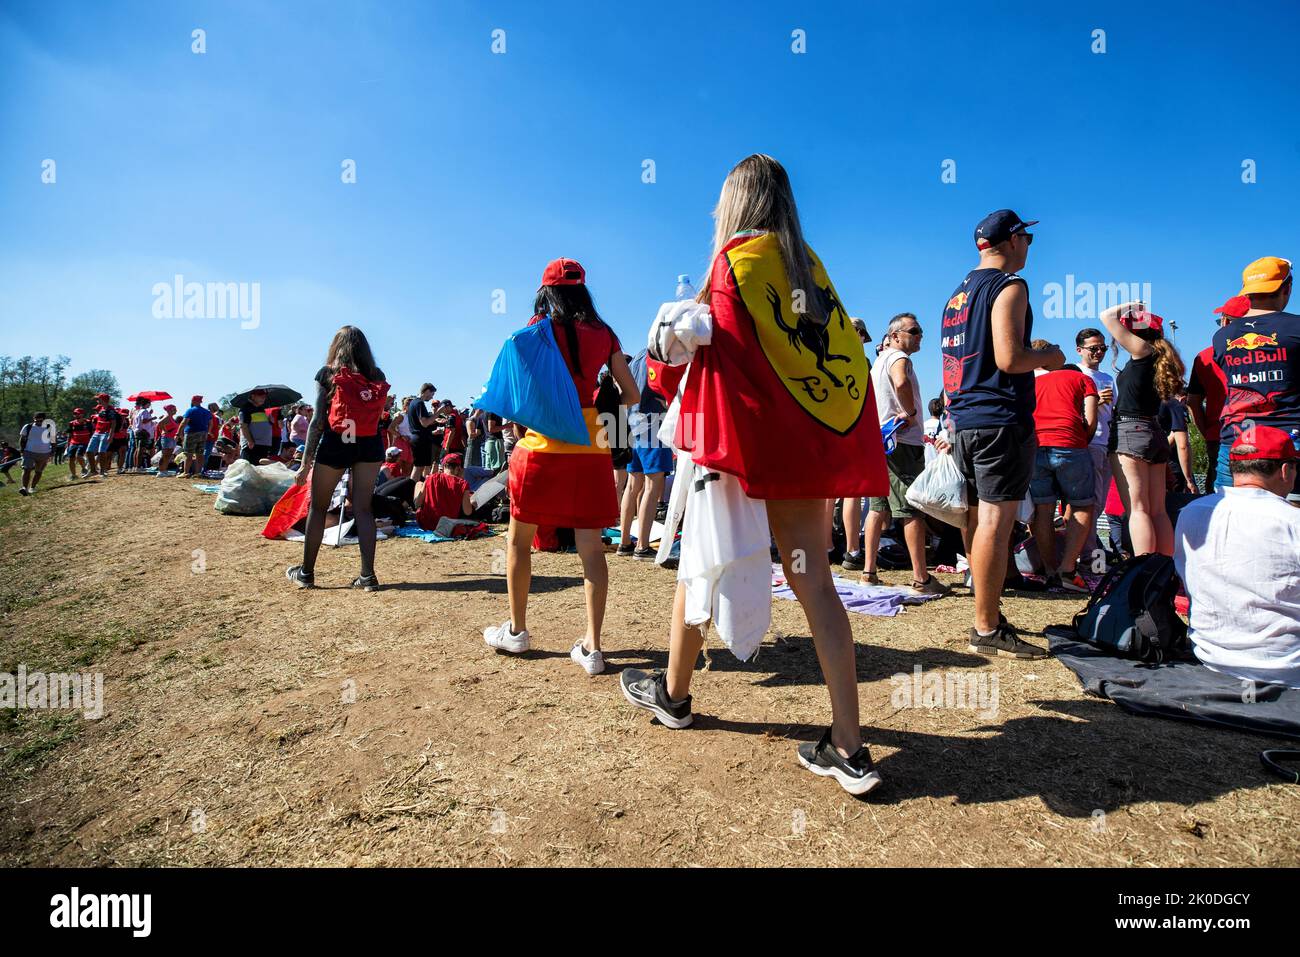 Monza, Italy. 11th Sep, 2022. Circuit atmosphere - fans. Italian Grand Prix, Sunday 11th September 2022. Monza Italy. Credit: James Moy/Alamy Live News Credit: James Moy/Alamy Live News Stock Photo